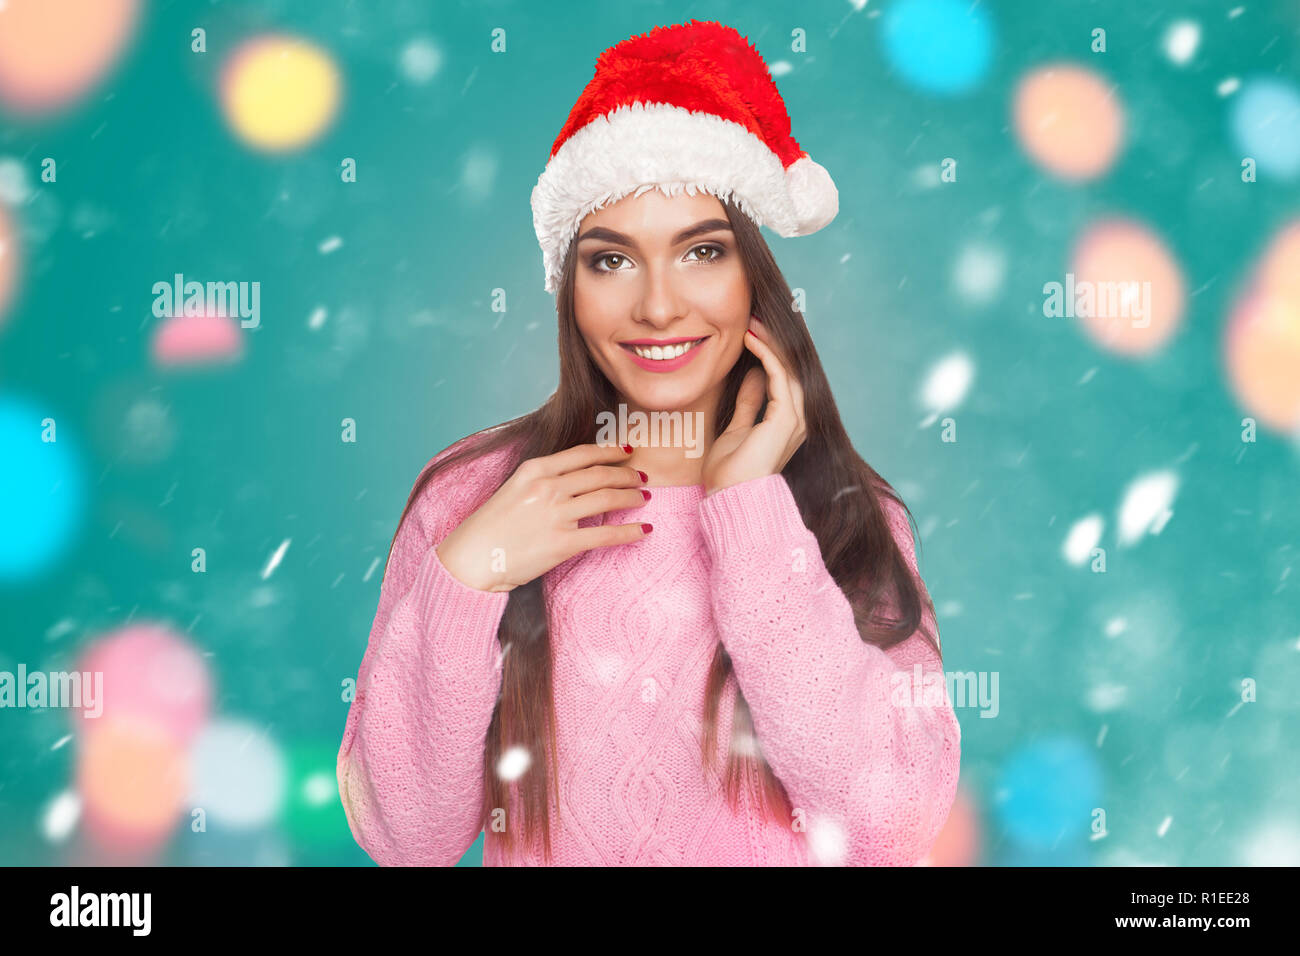 Girl standing in Santa Claus hat Banque D'Images